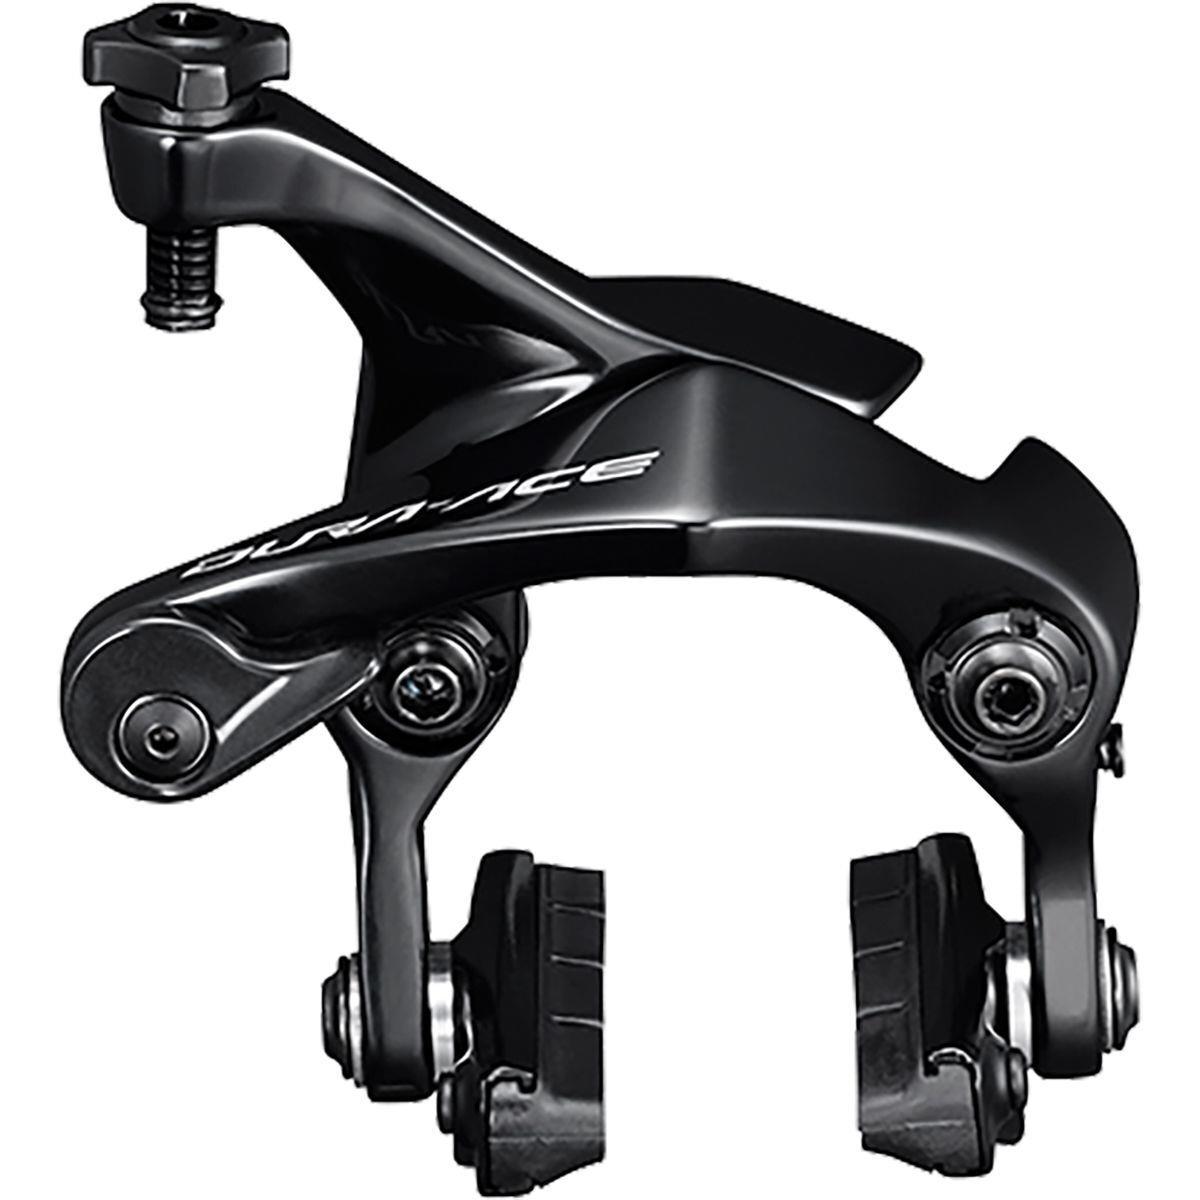 Shimano Dura-ace BR-9110 Direct Mount Brake Calipers One Color Rear Seat Stay